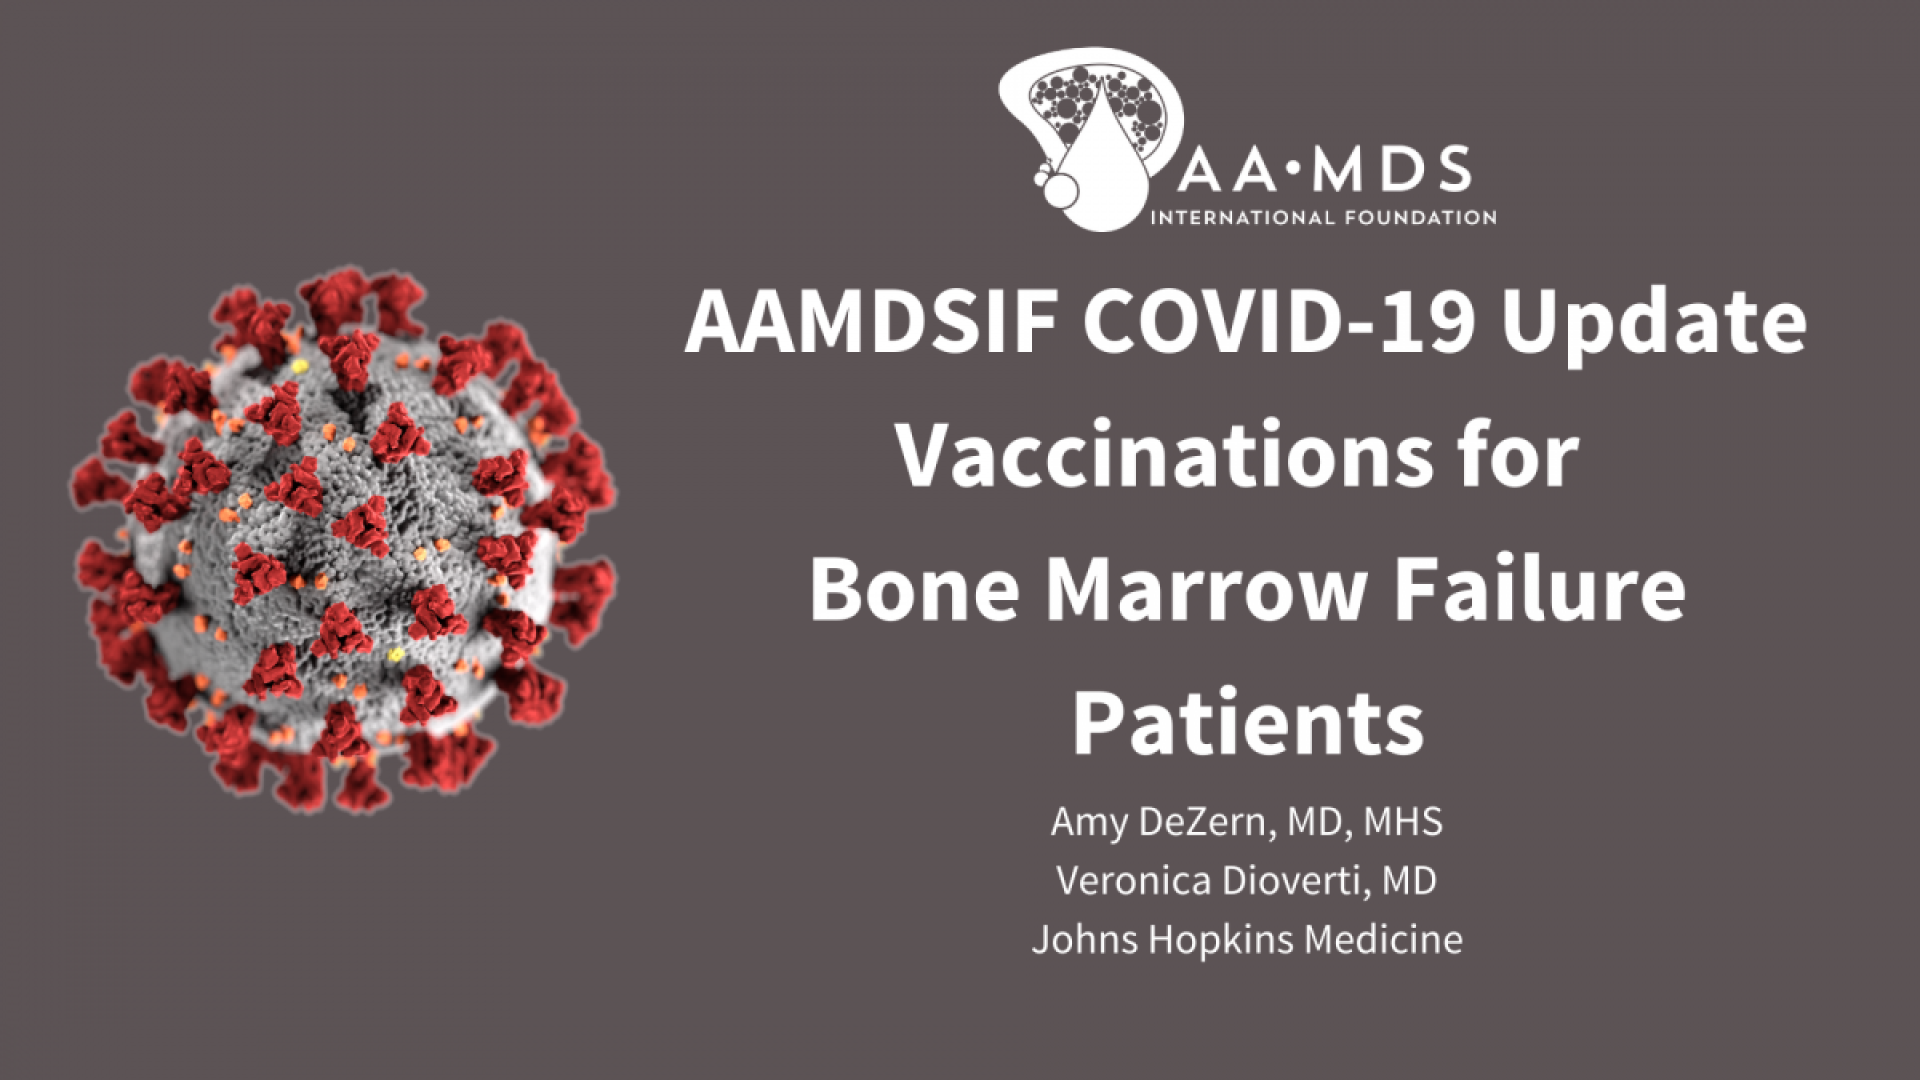 Covid-19 and vaccines for bone marrow failure patients